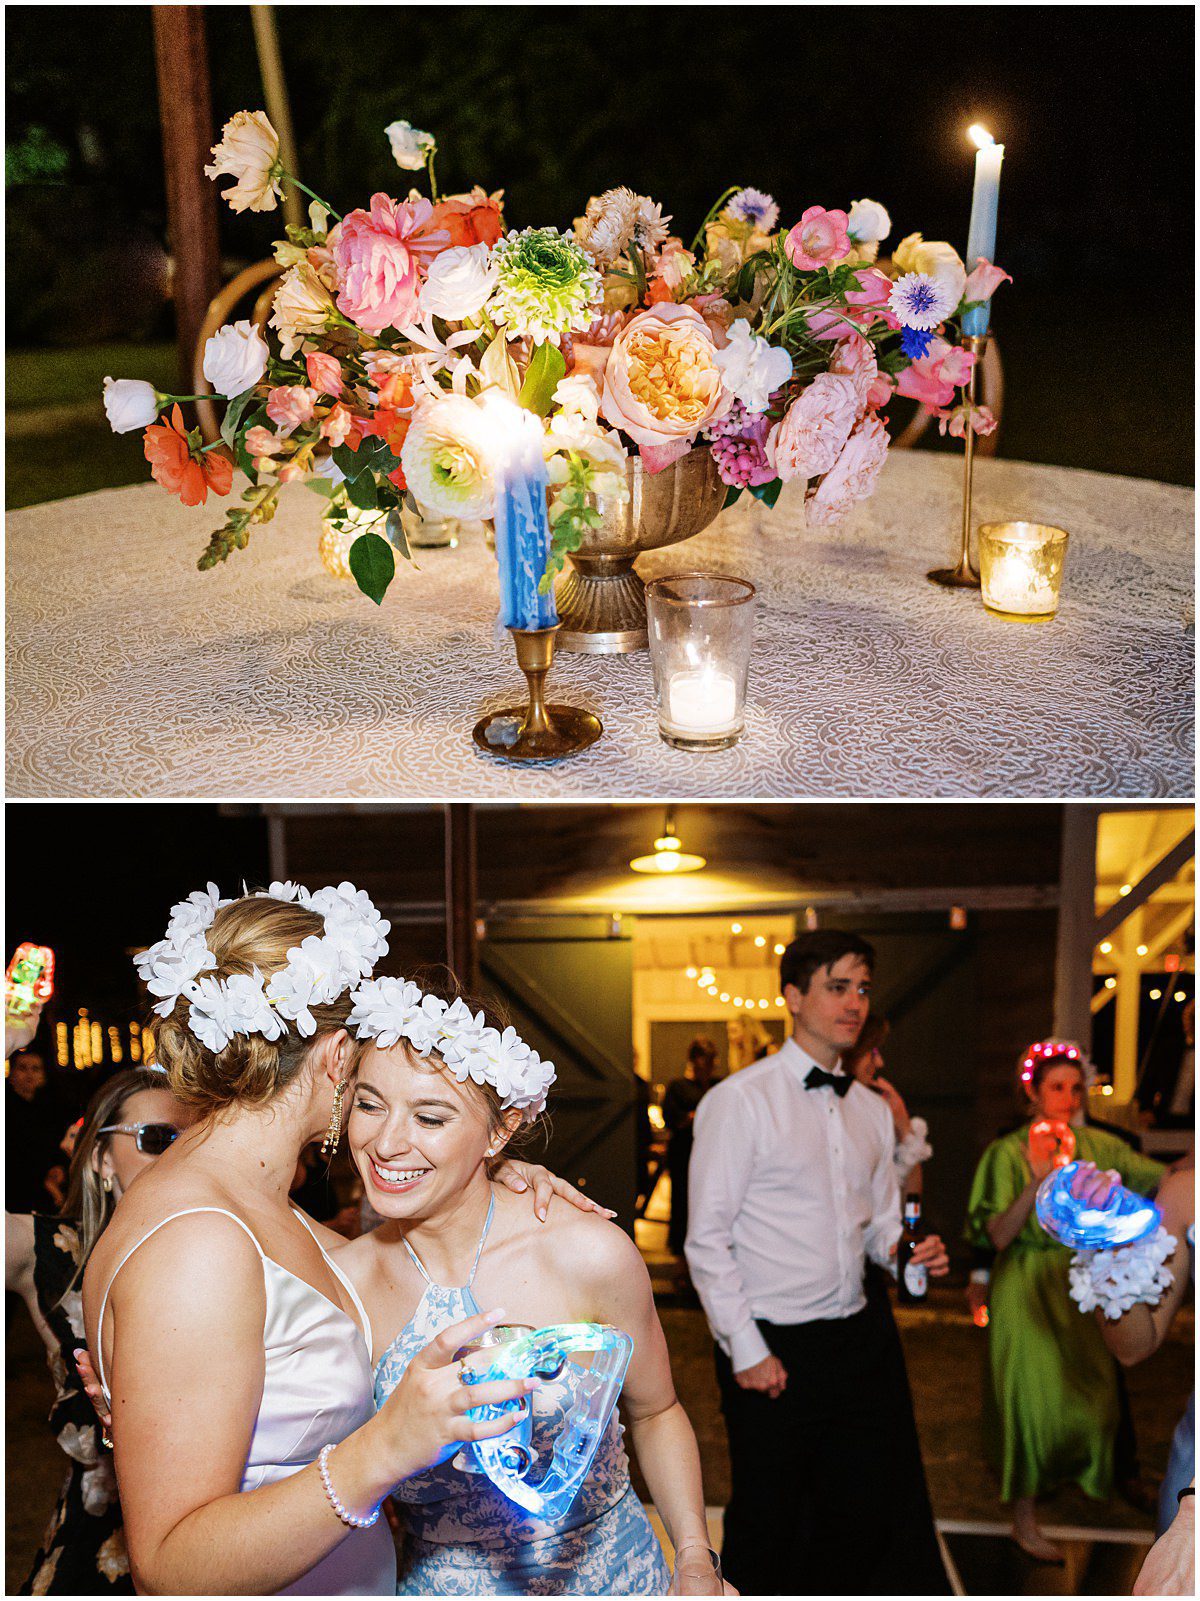 night time photo of melted tapered candles and colorful wedding flowers on a table at a wedding reception